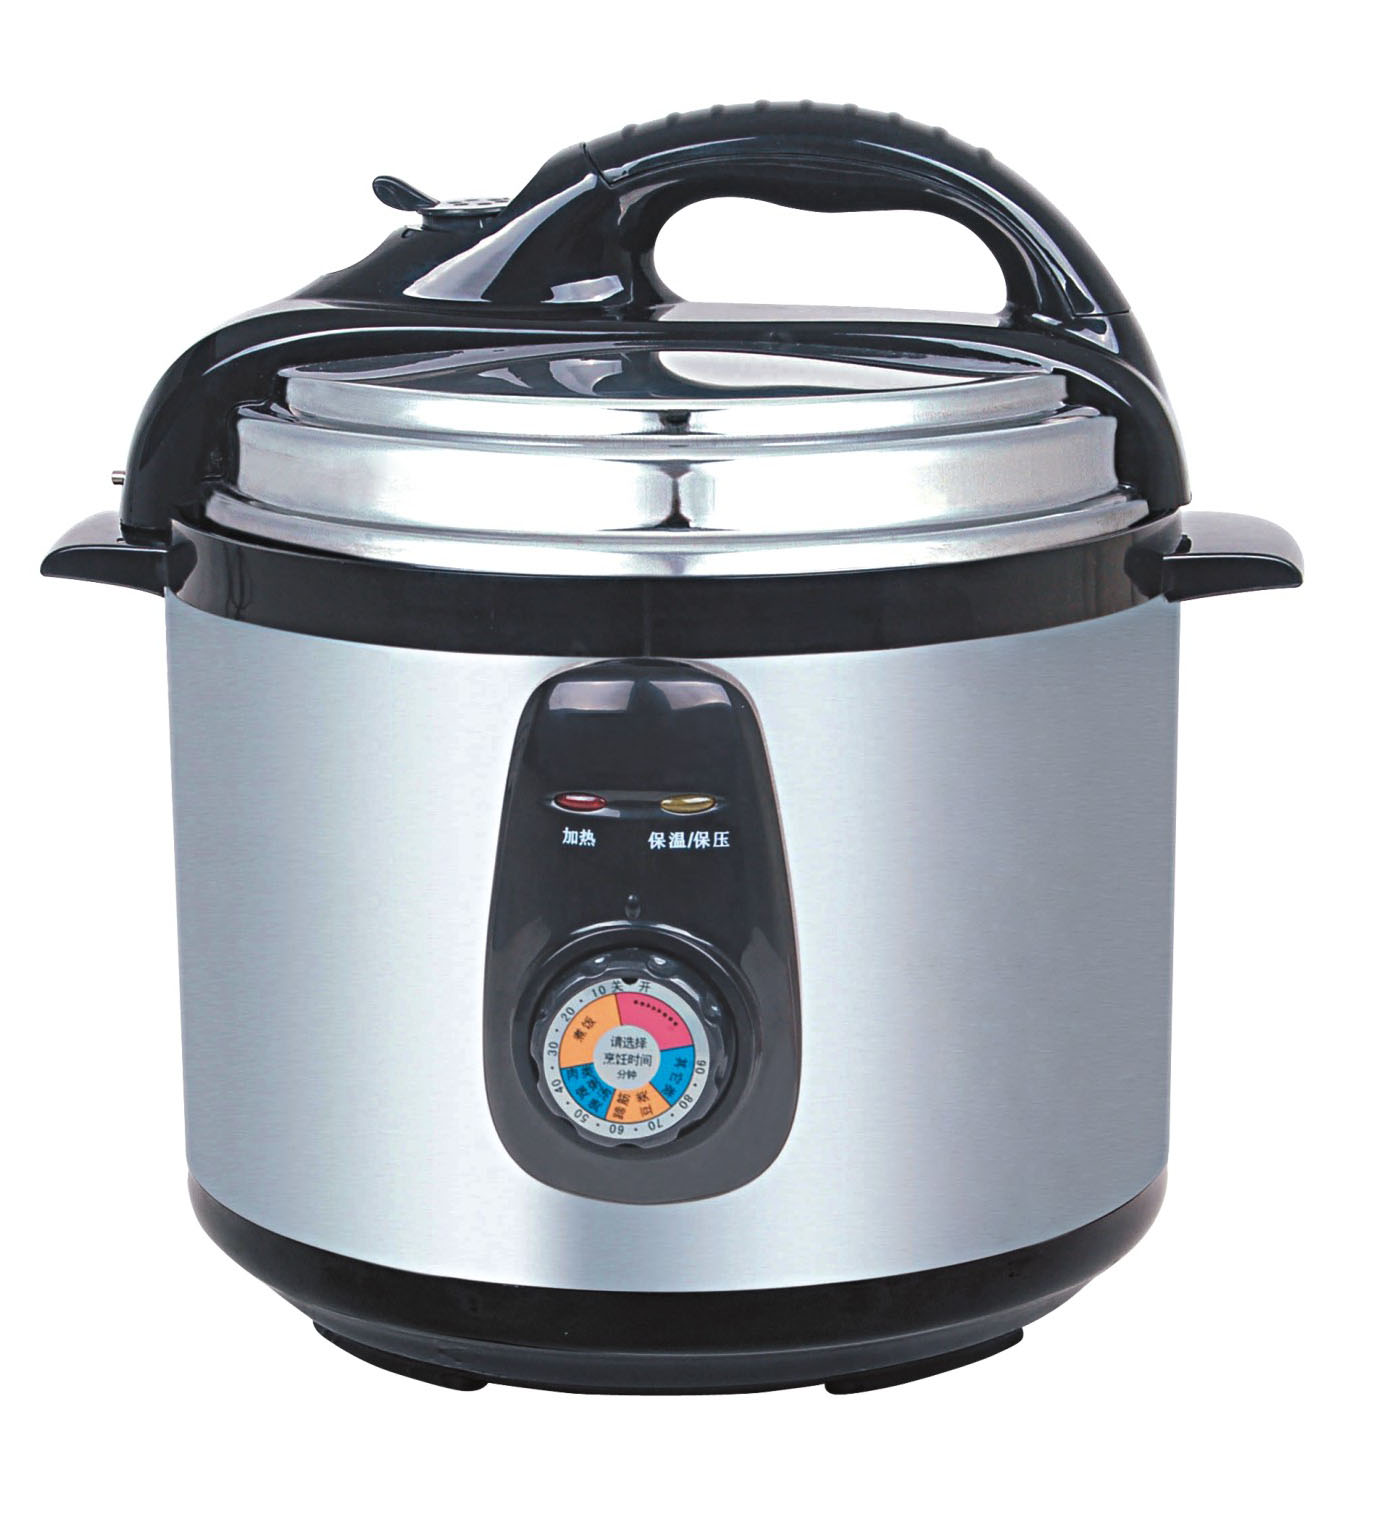 Digital Non Stick Stainless Steel Steam electric low and high pressure Cooker 